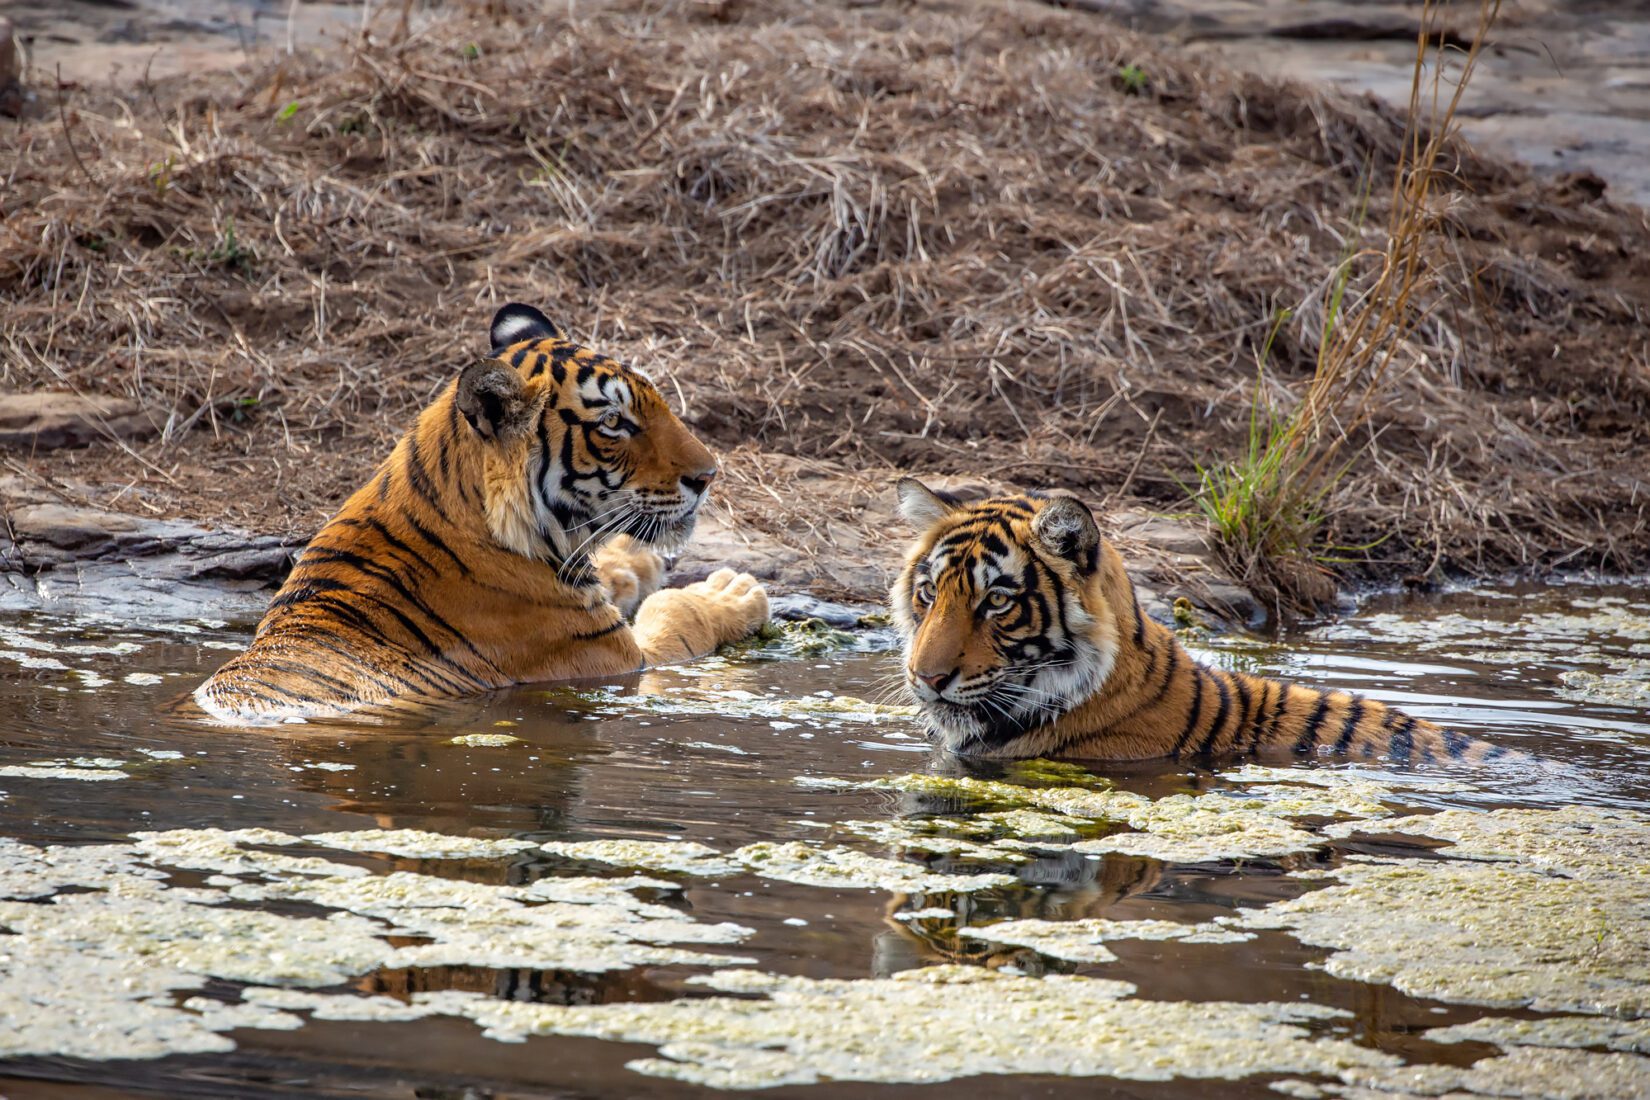 Wild tiger cubs in water